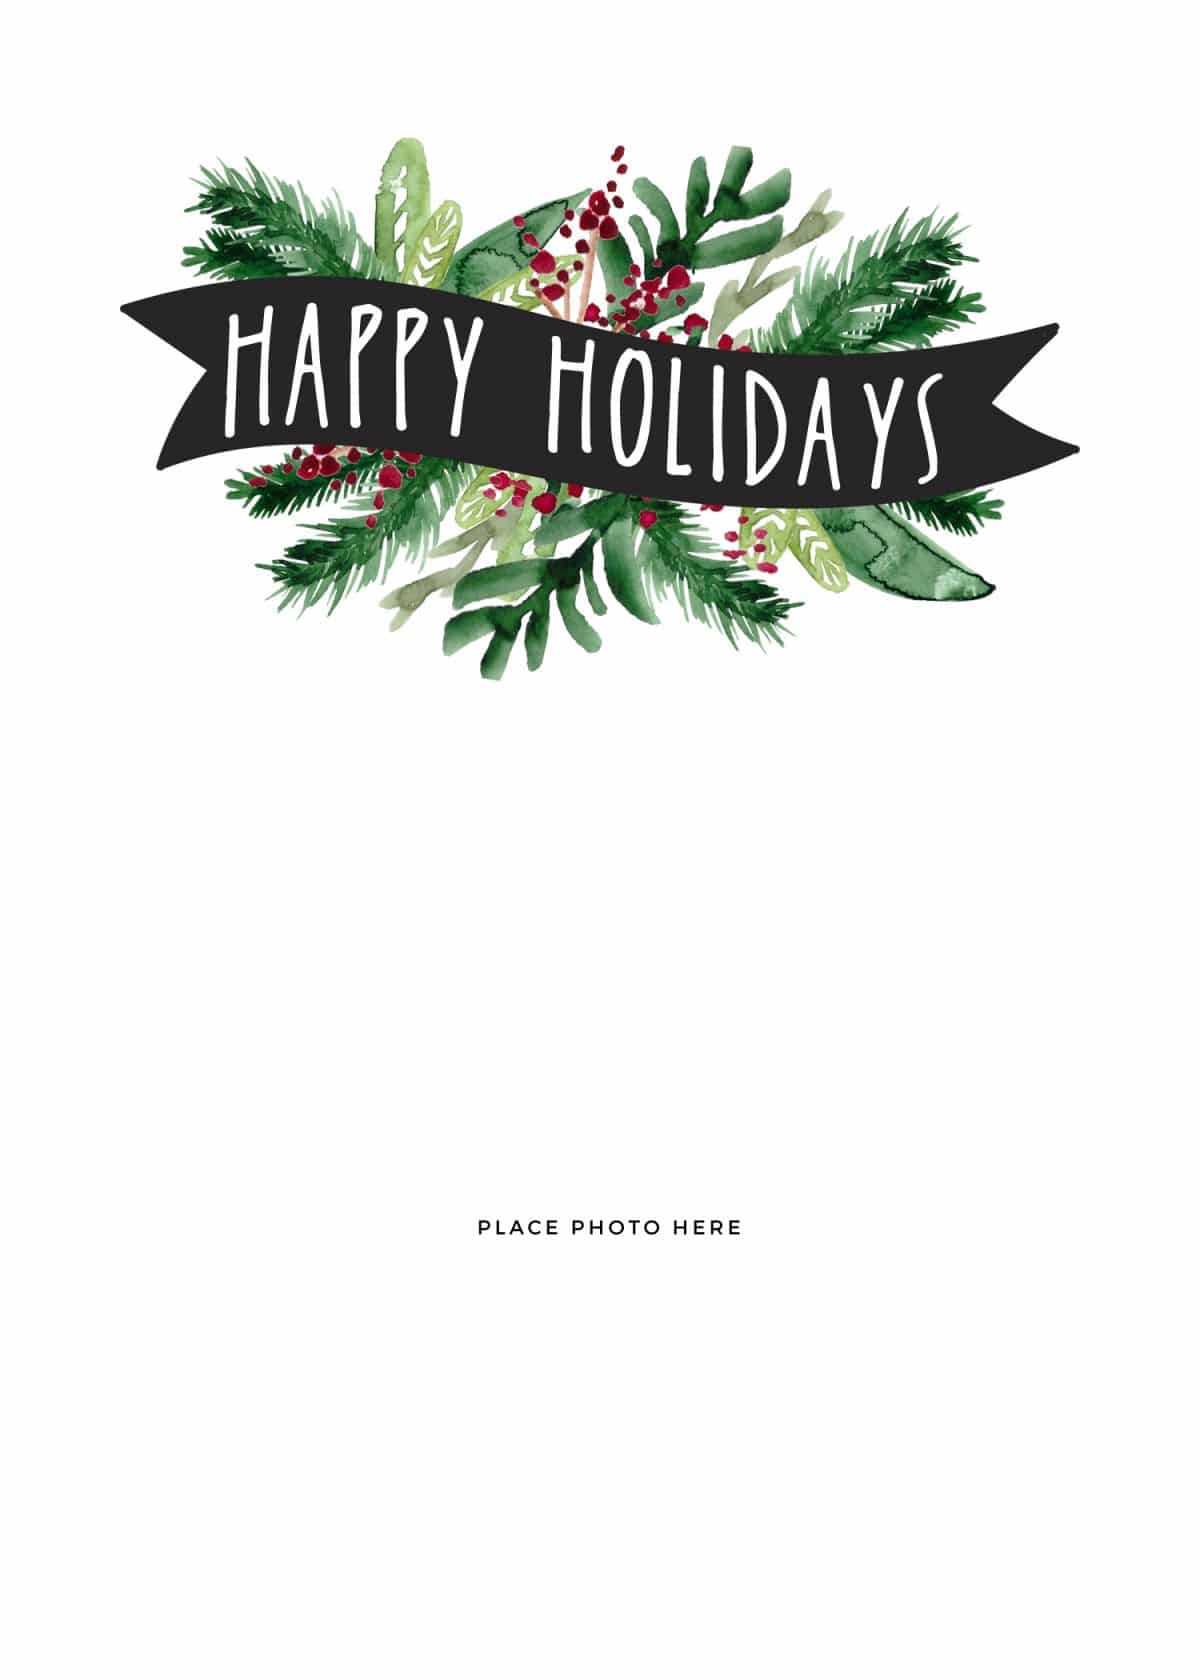 Make Your Own Photo Christmas Cards (For Free!) – Somewhat Pertaining To Happy Holidays Card Template